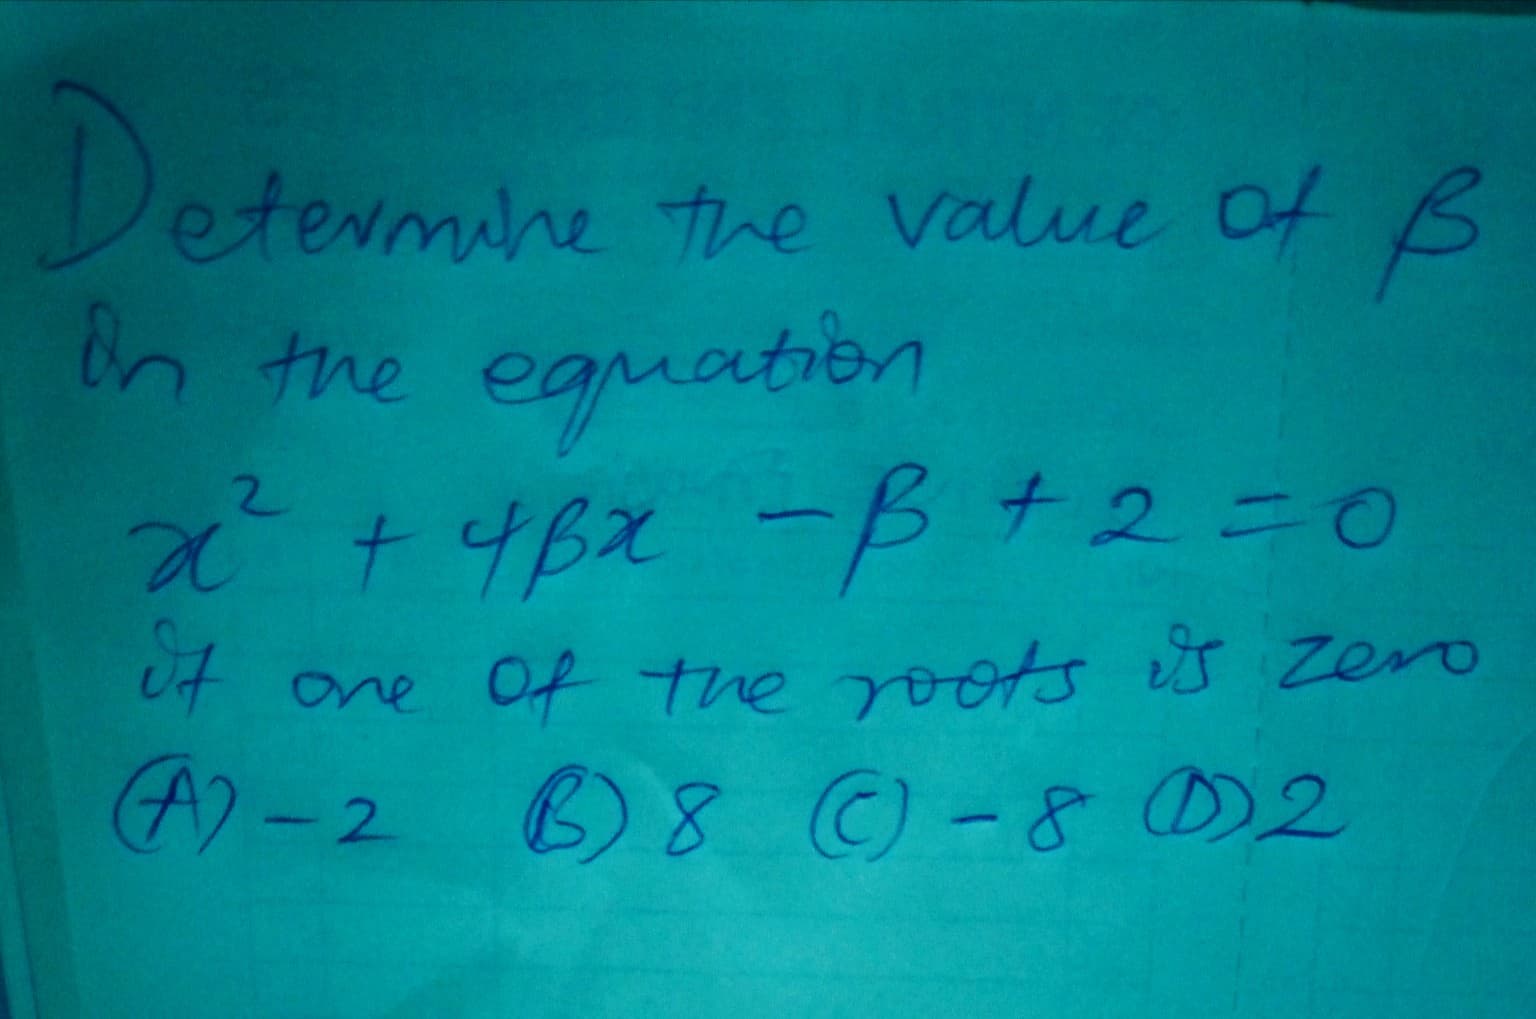 Detevmine tre value of B
On the eguation
+ 48x-B
Et
2.
+2=0
Ut one Of the roots S zero
A)-2 B8 -8 D2
